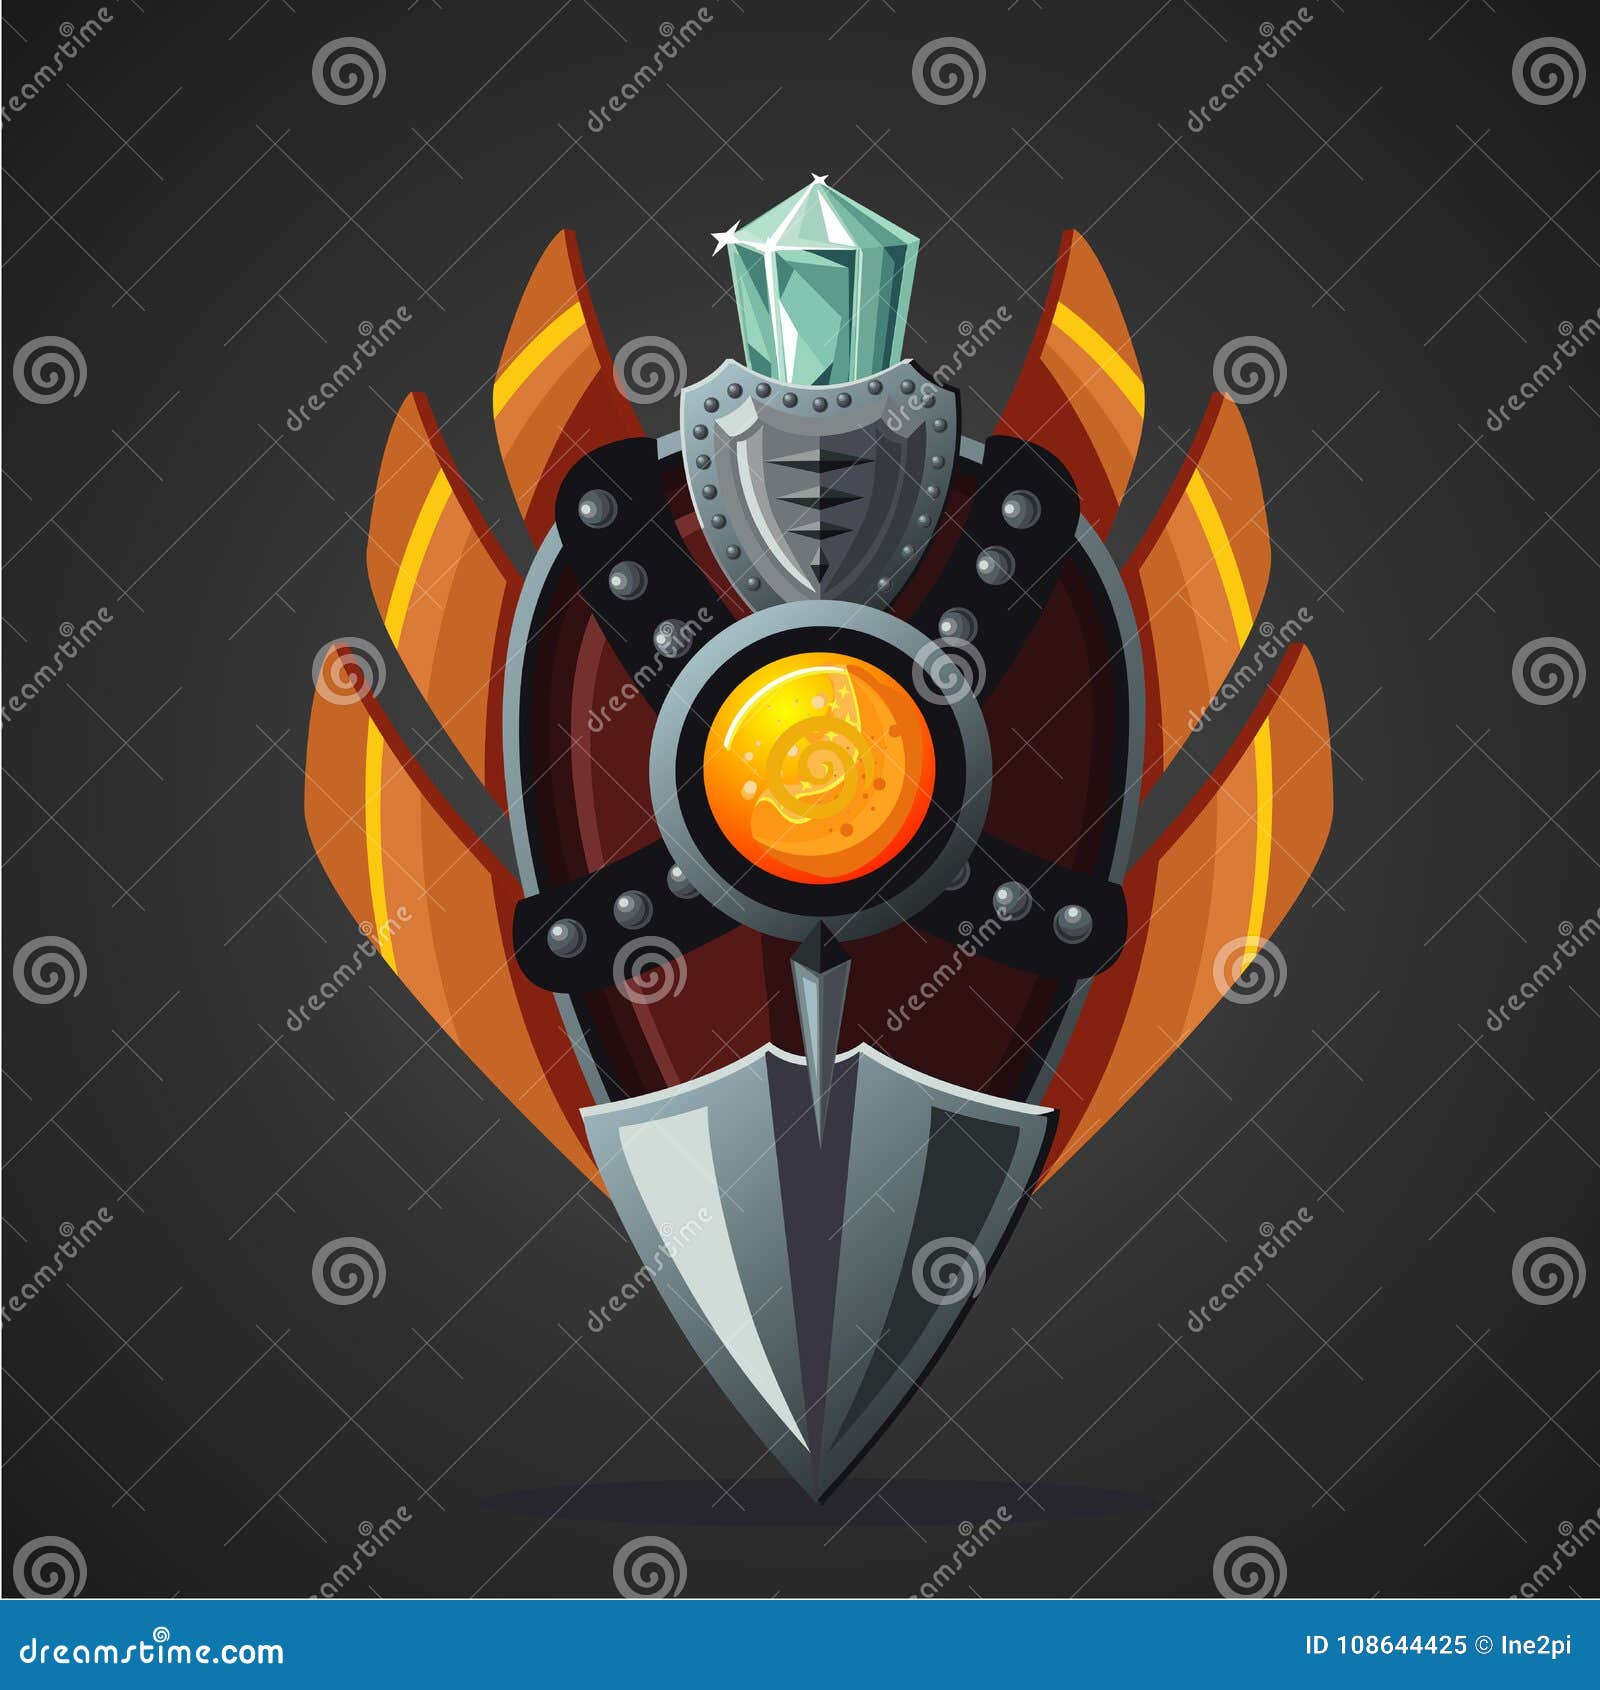 Fantasy Shield Magic Weapon With Crystal Game Design Concept